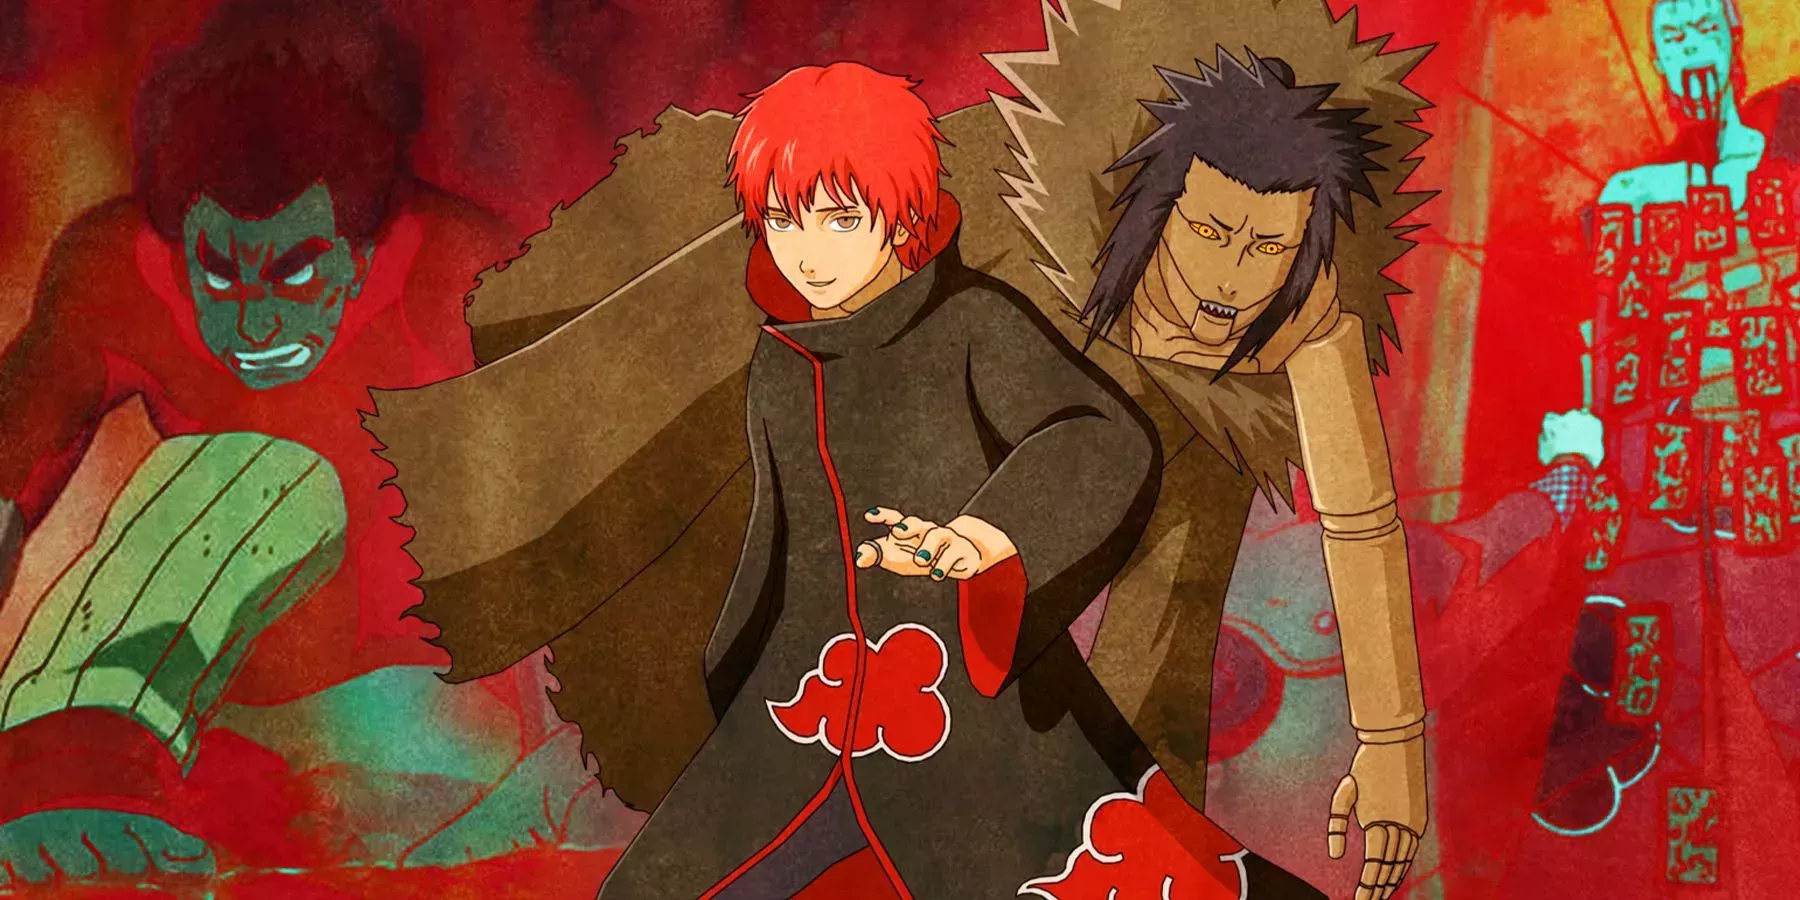 Might Guy, Sasori with a puppet, and Hidan in Shikamaru's trap from anime Naruto